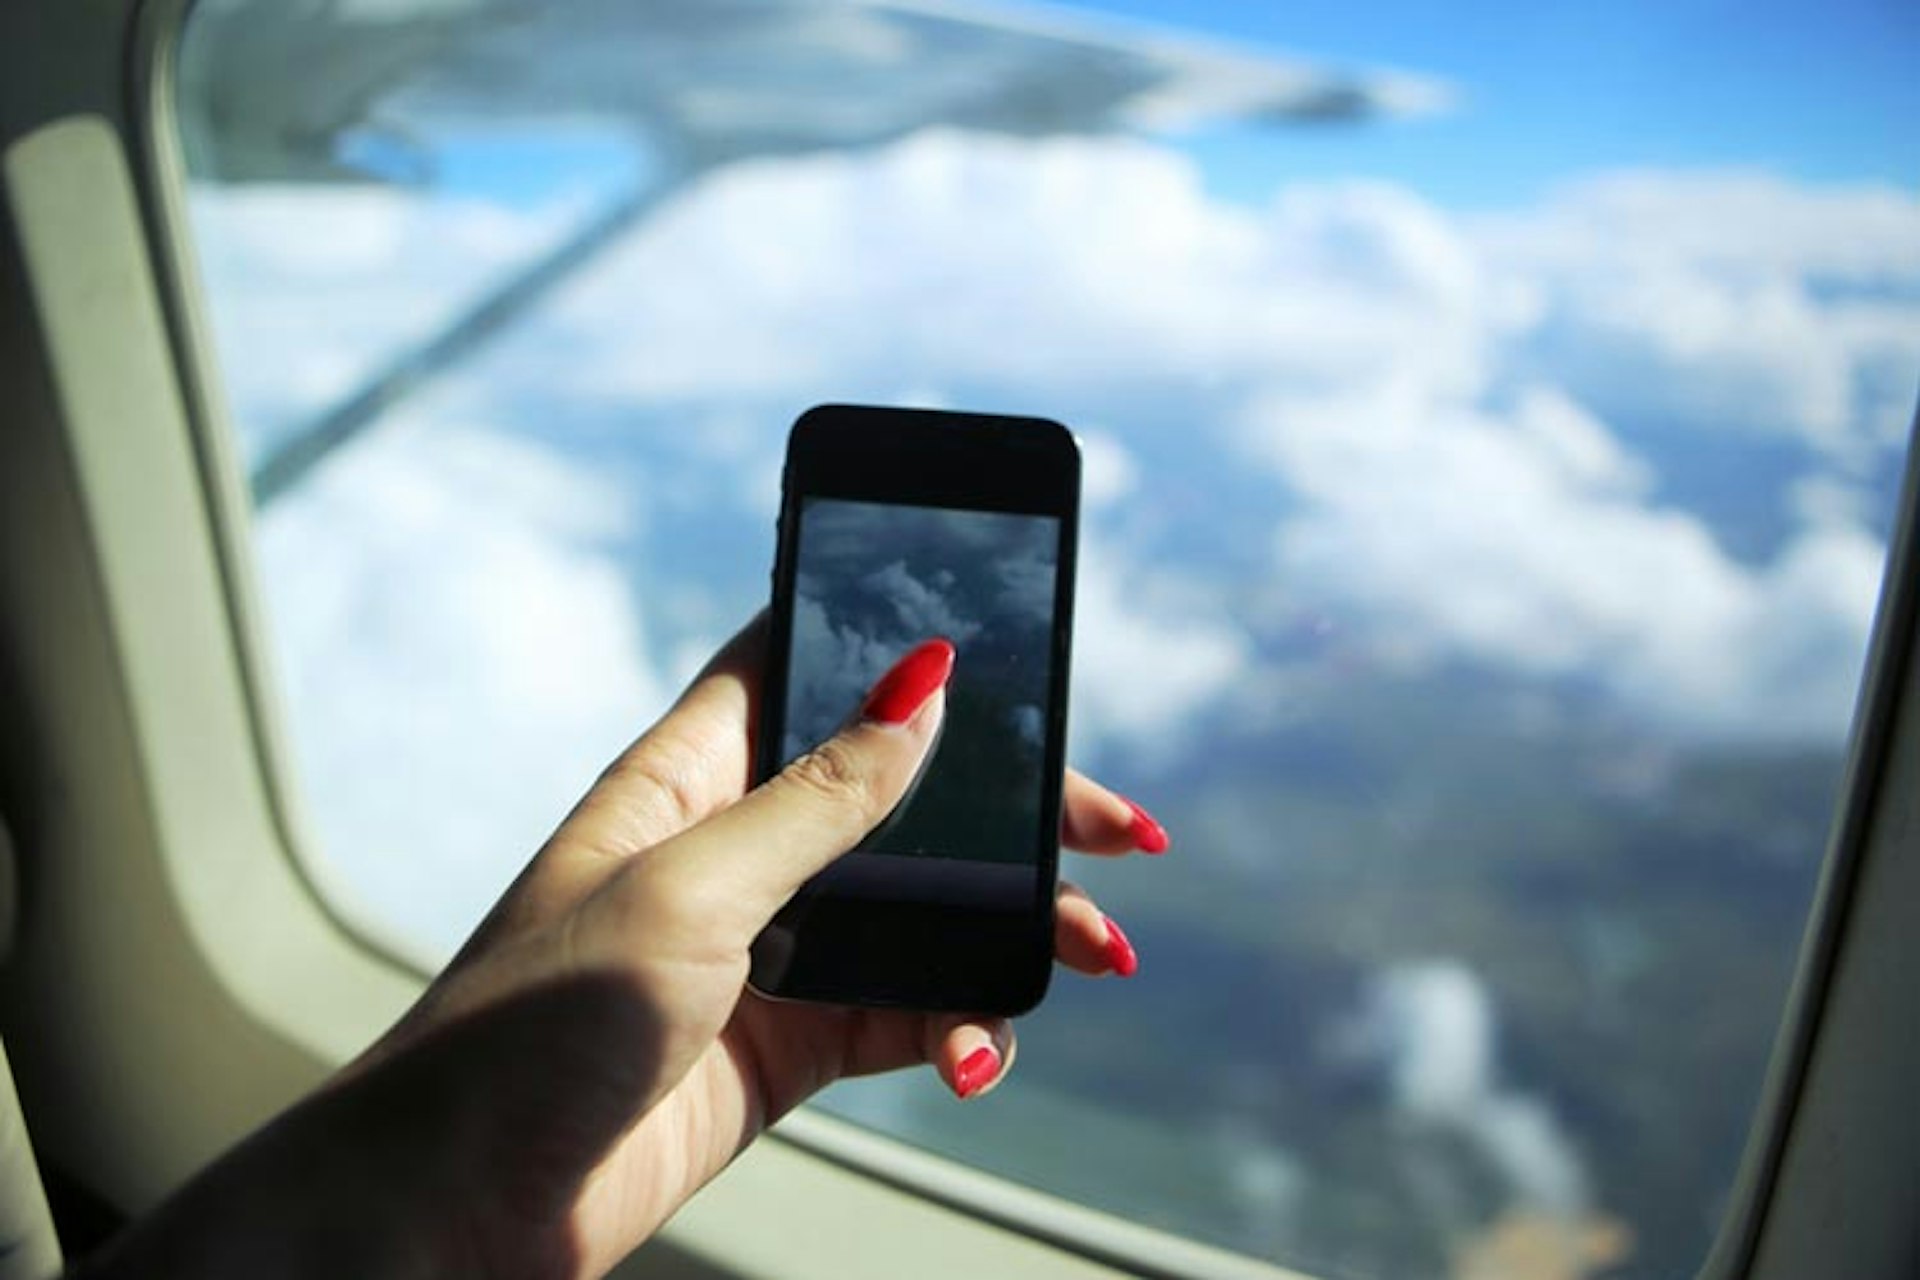 Snapping a mid-air Instagram picture is irresistible when you have travel planning and social sharing at your fingertips. Image by Photography by Bobi / Getty Images